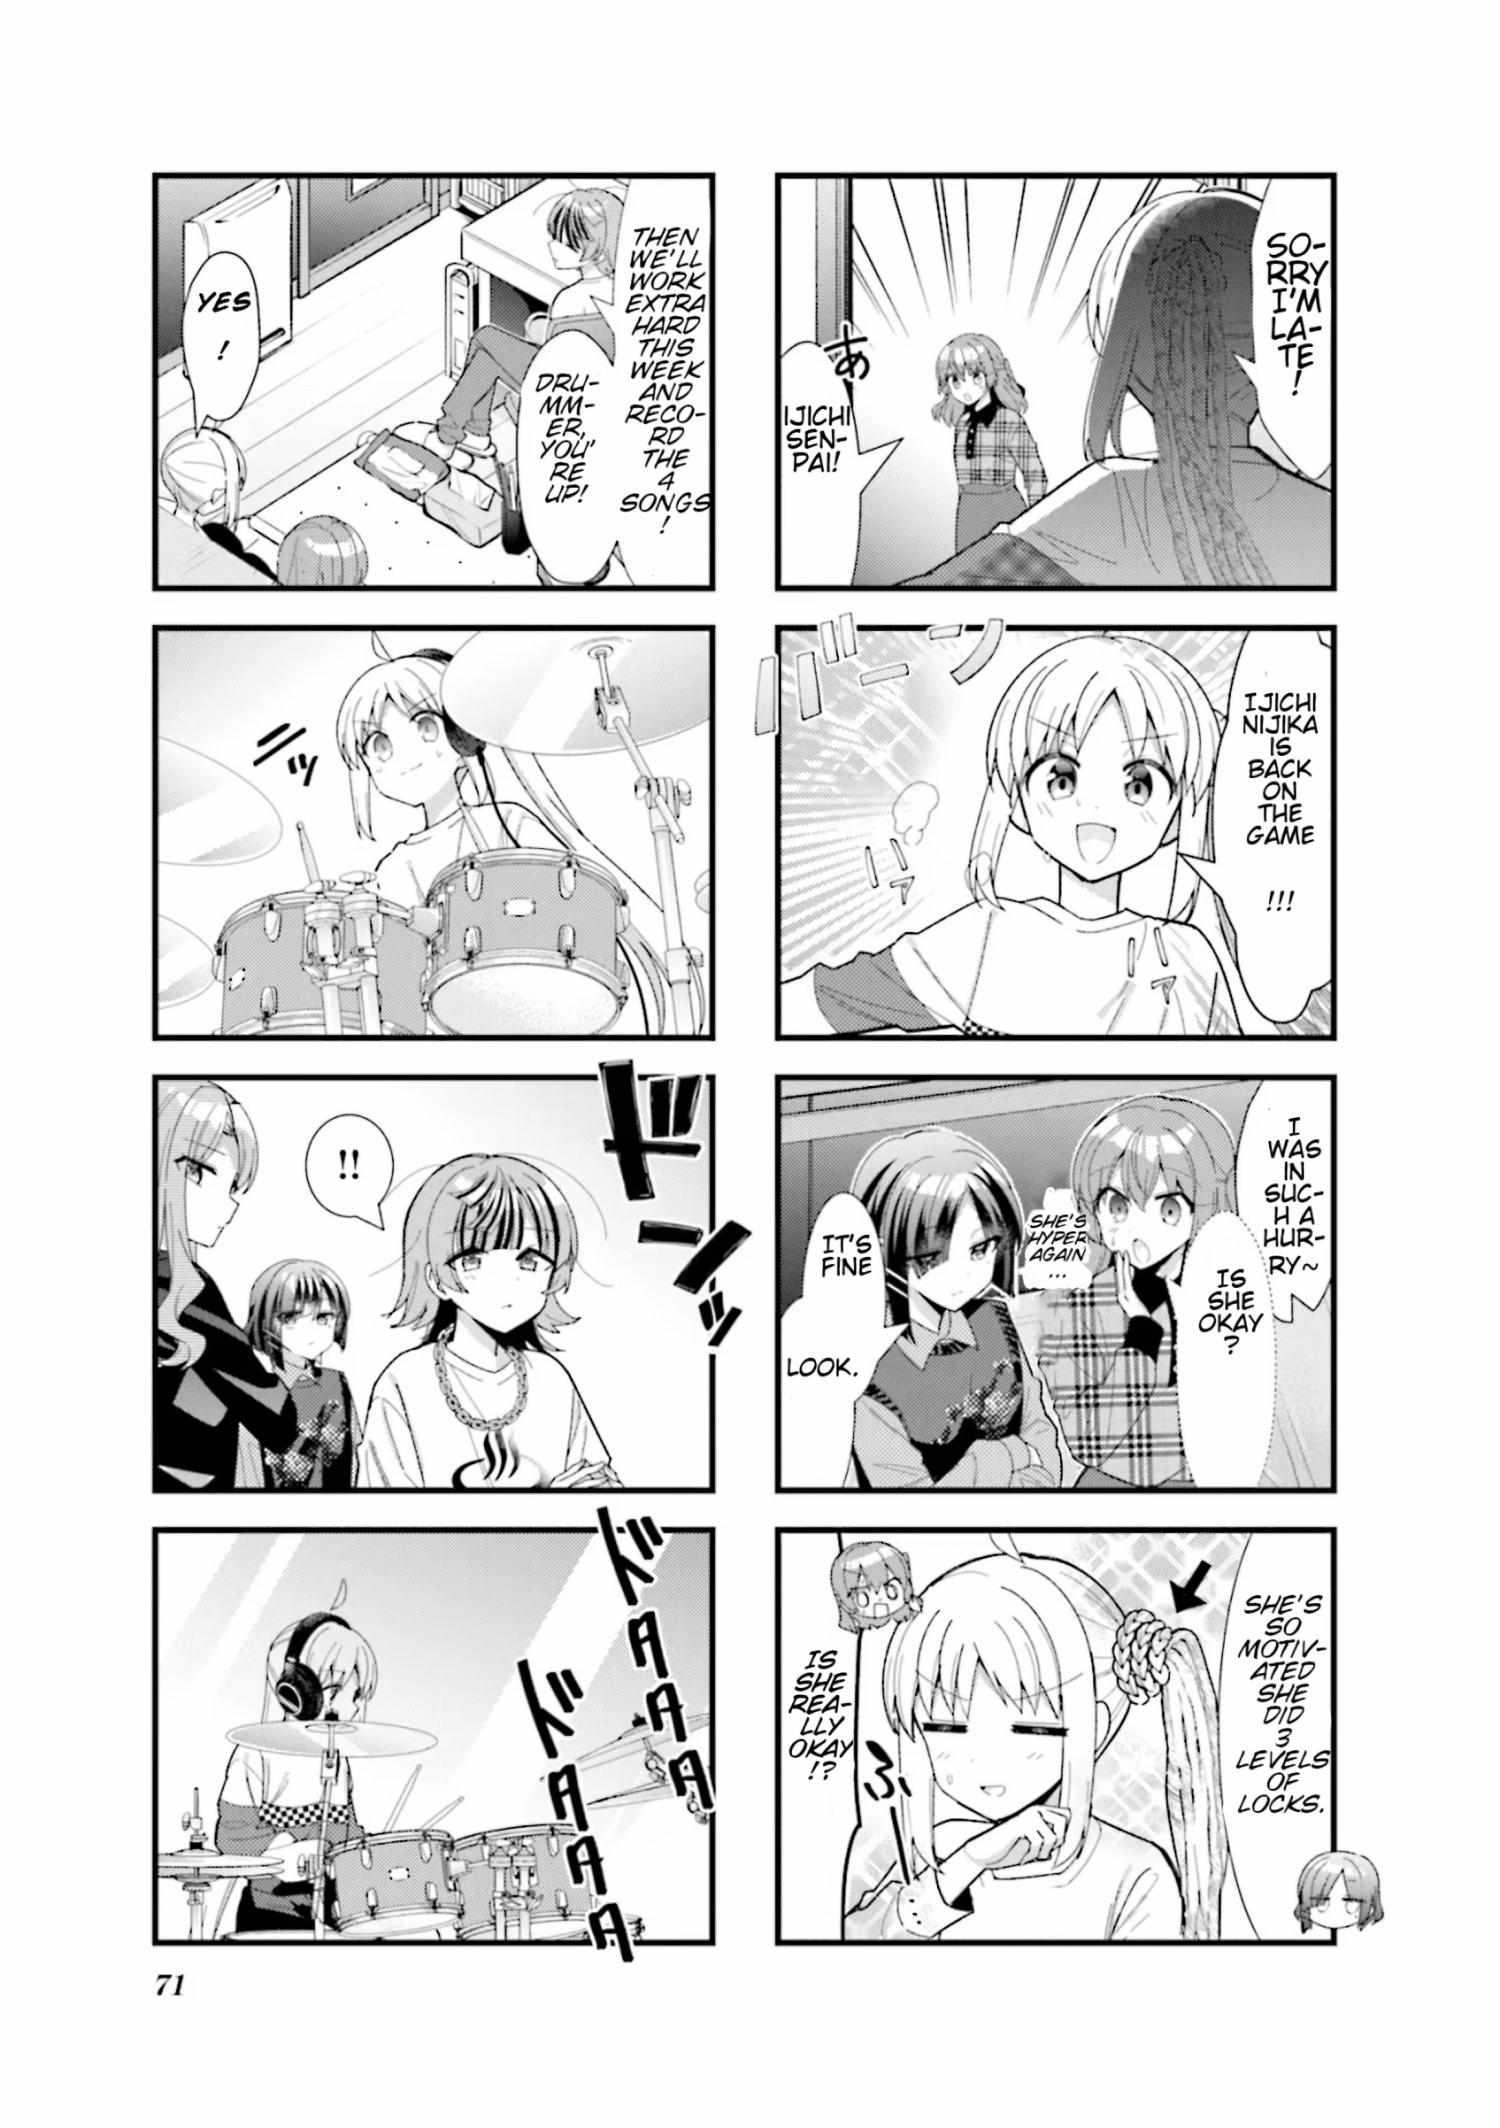 Bocchi The Rock Chapter 57 page 4 - 